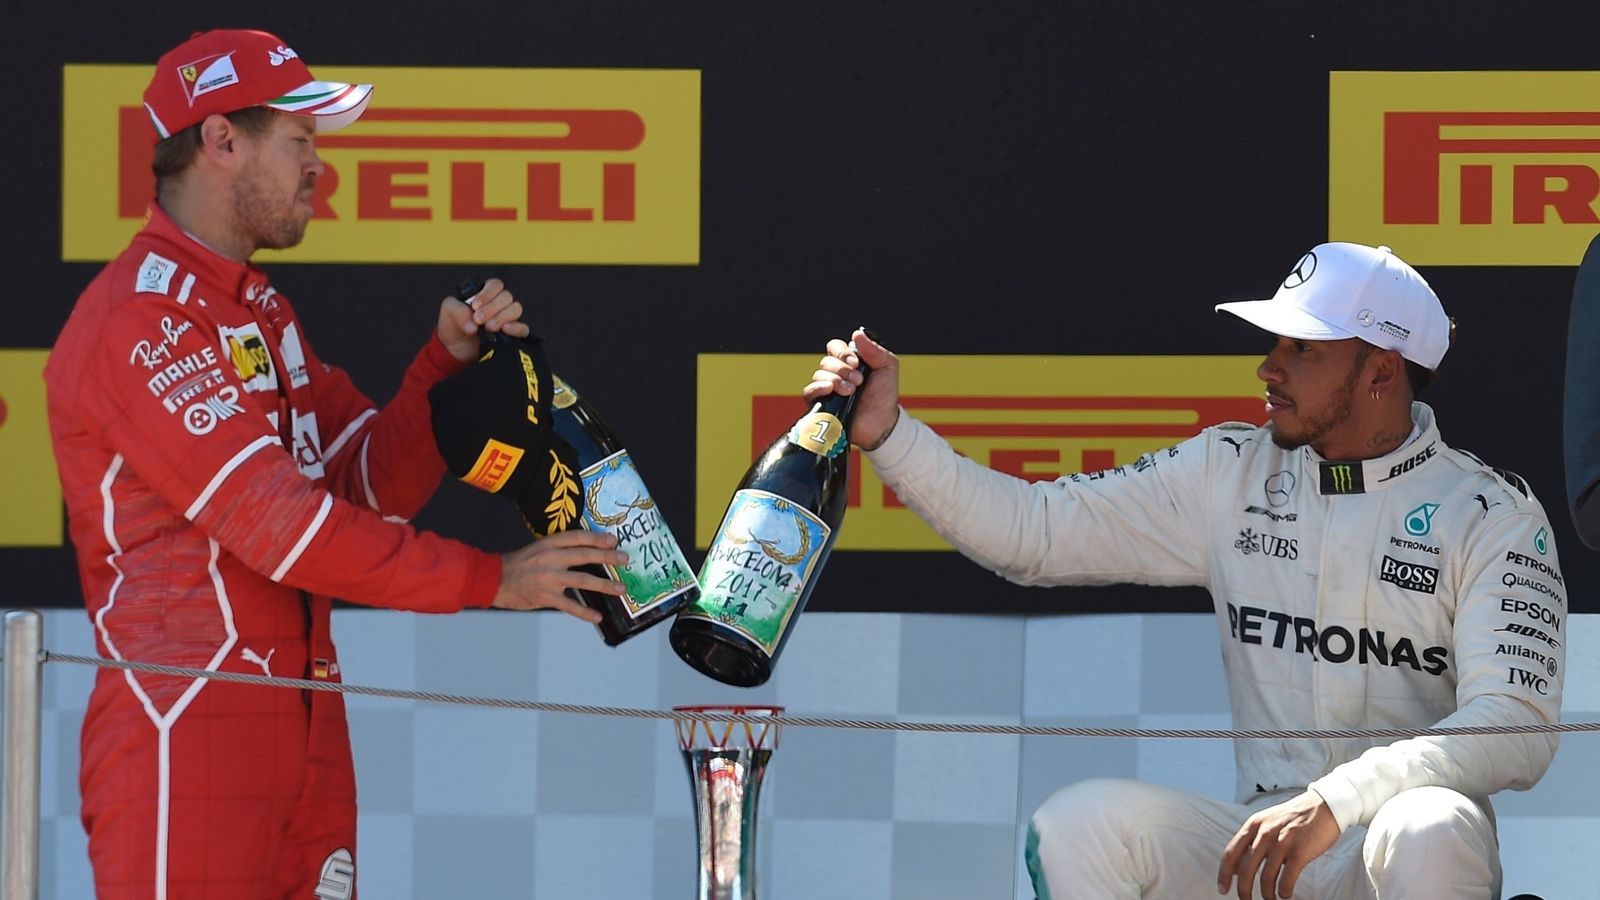 Lewis Hamilton Sebastian Vettel In F1 Duel To Be Best In Their Time F1 News